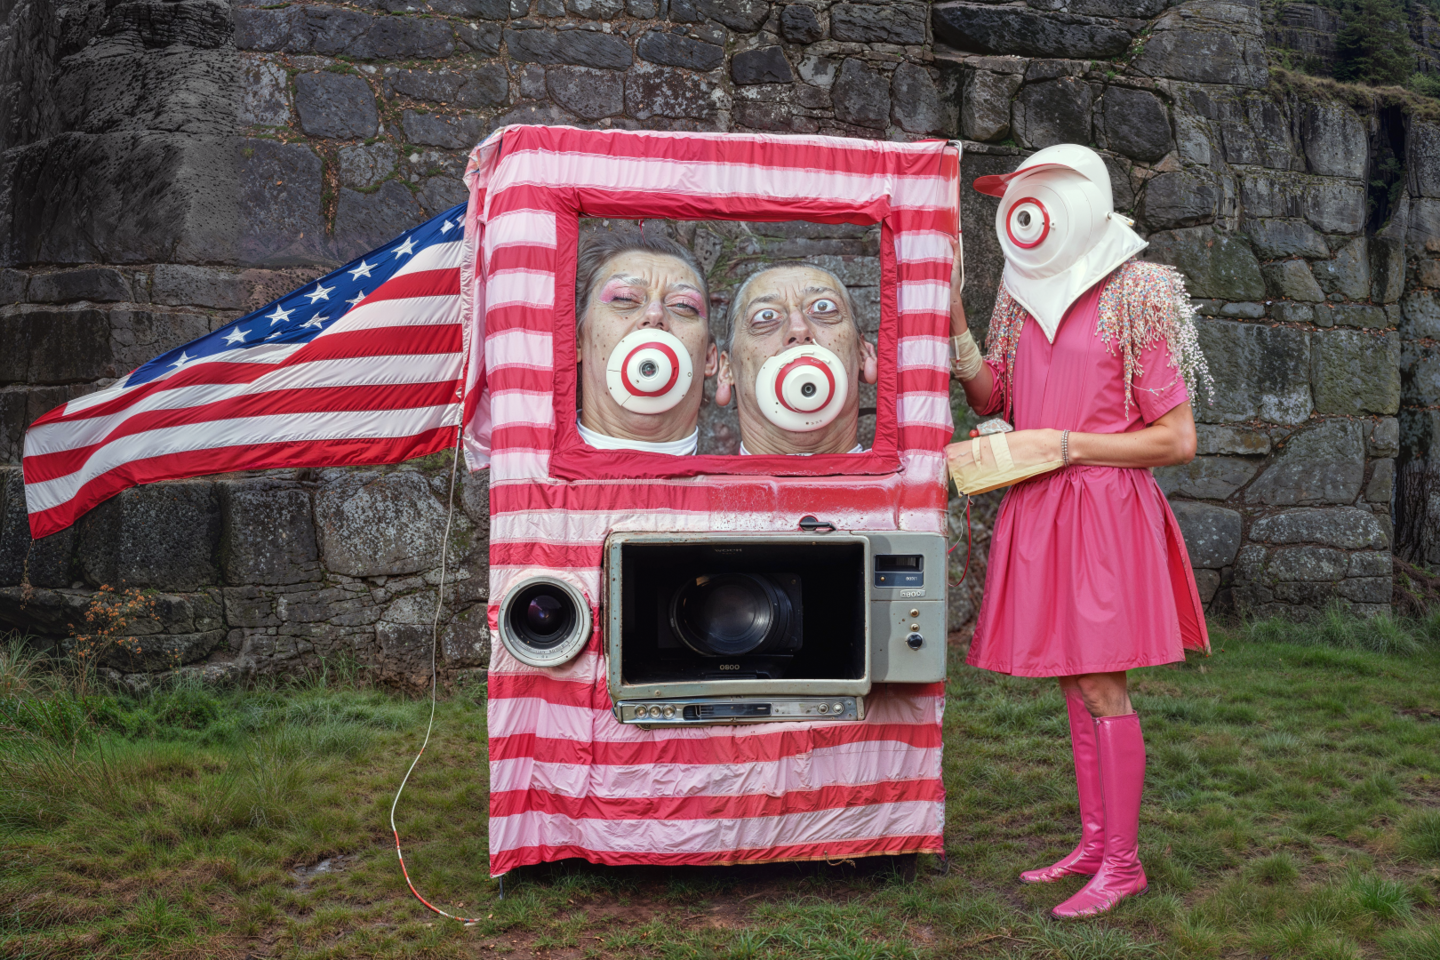 striped box with heads with targets on them inside, next to person standing in pink clothes